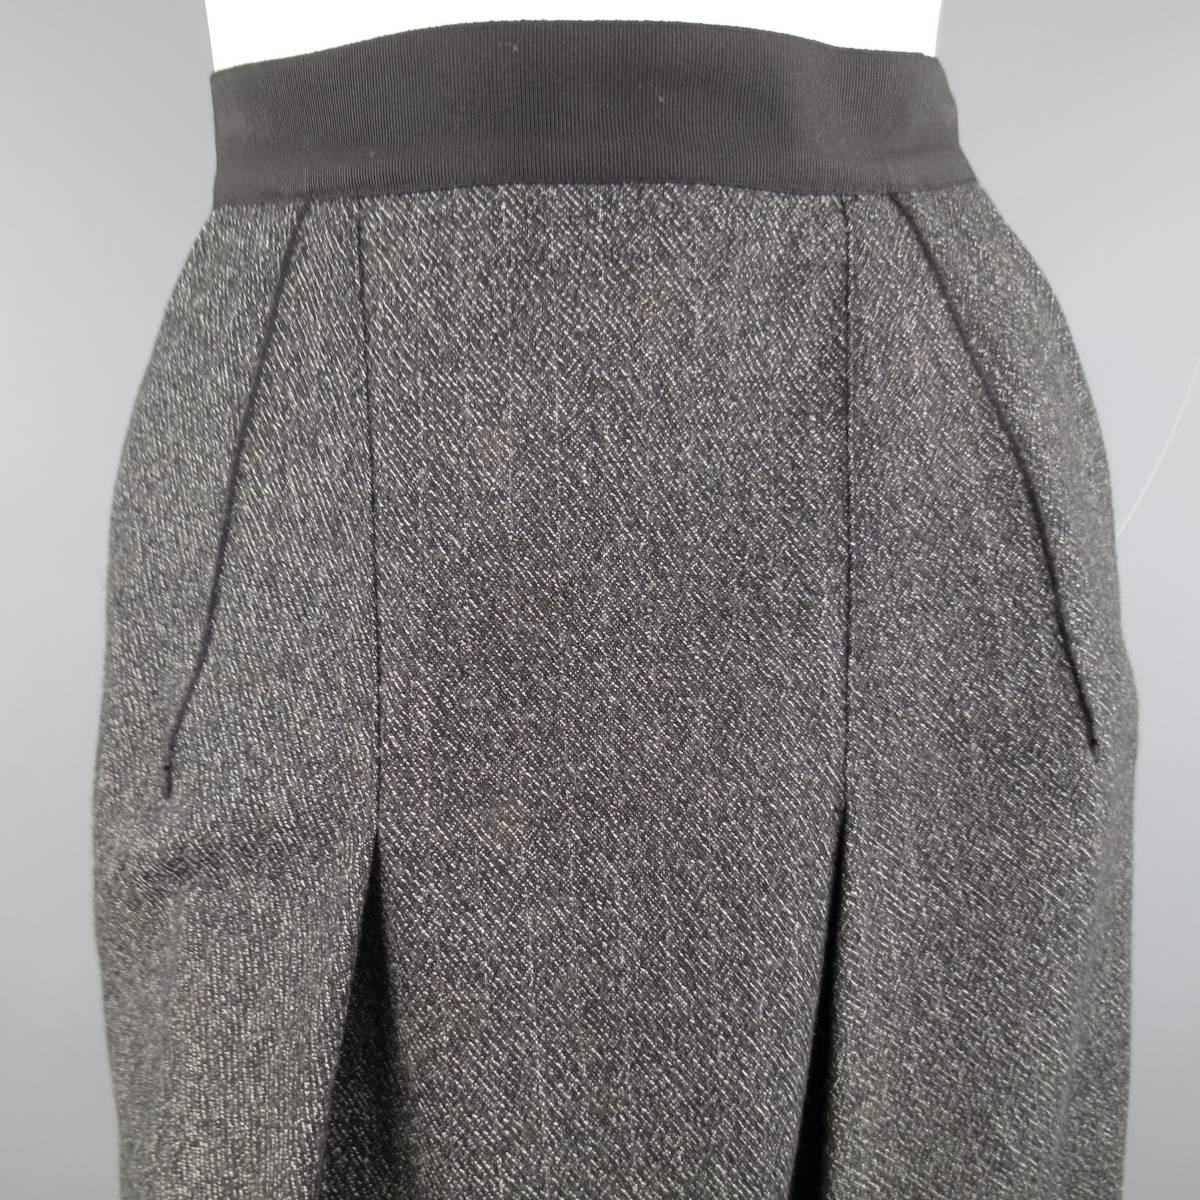 DOLCE & GABBANA A-line skirt in a heather textured fabric featuring a darted front with pleats and thick ribbon waistband. Made in Italy.
 
Excellent Pre-Owned Condition.
Marked: 40
 
Measurements:
 
Waste: 27 in.
Hips: 37 in.
Length: 21 in.